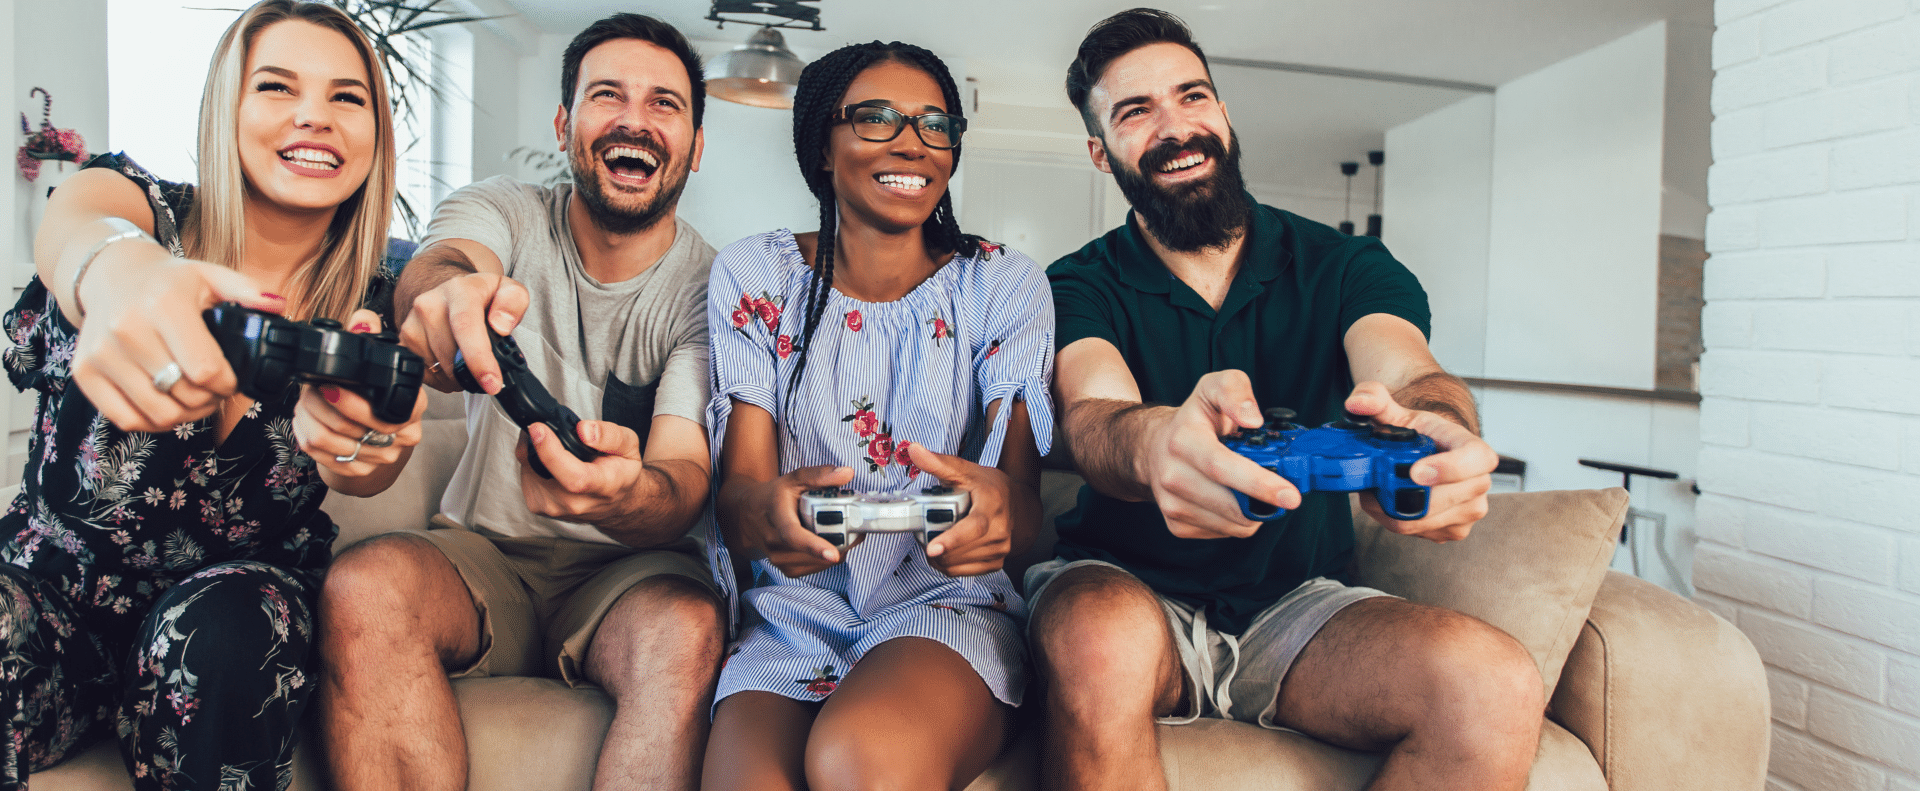 Defining the Player Experience Gap – Why Gaming Companies Need to Level Up Player Engagement